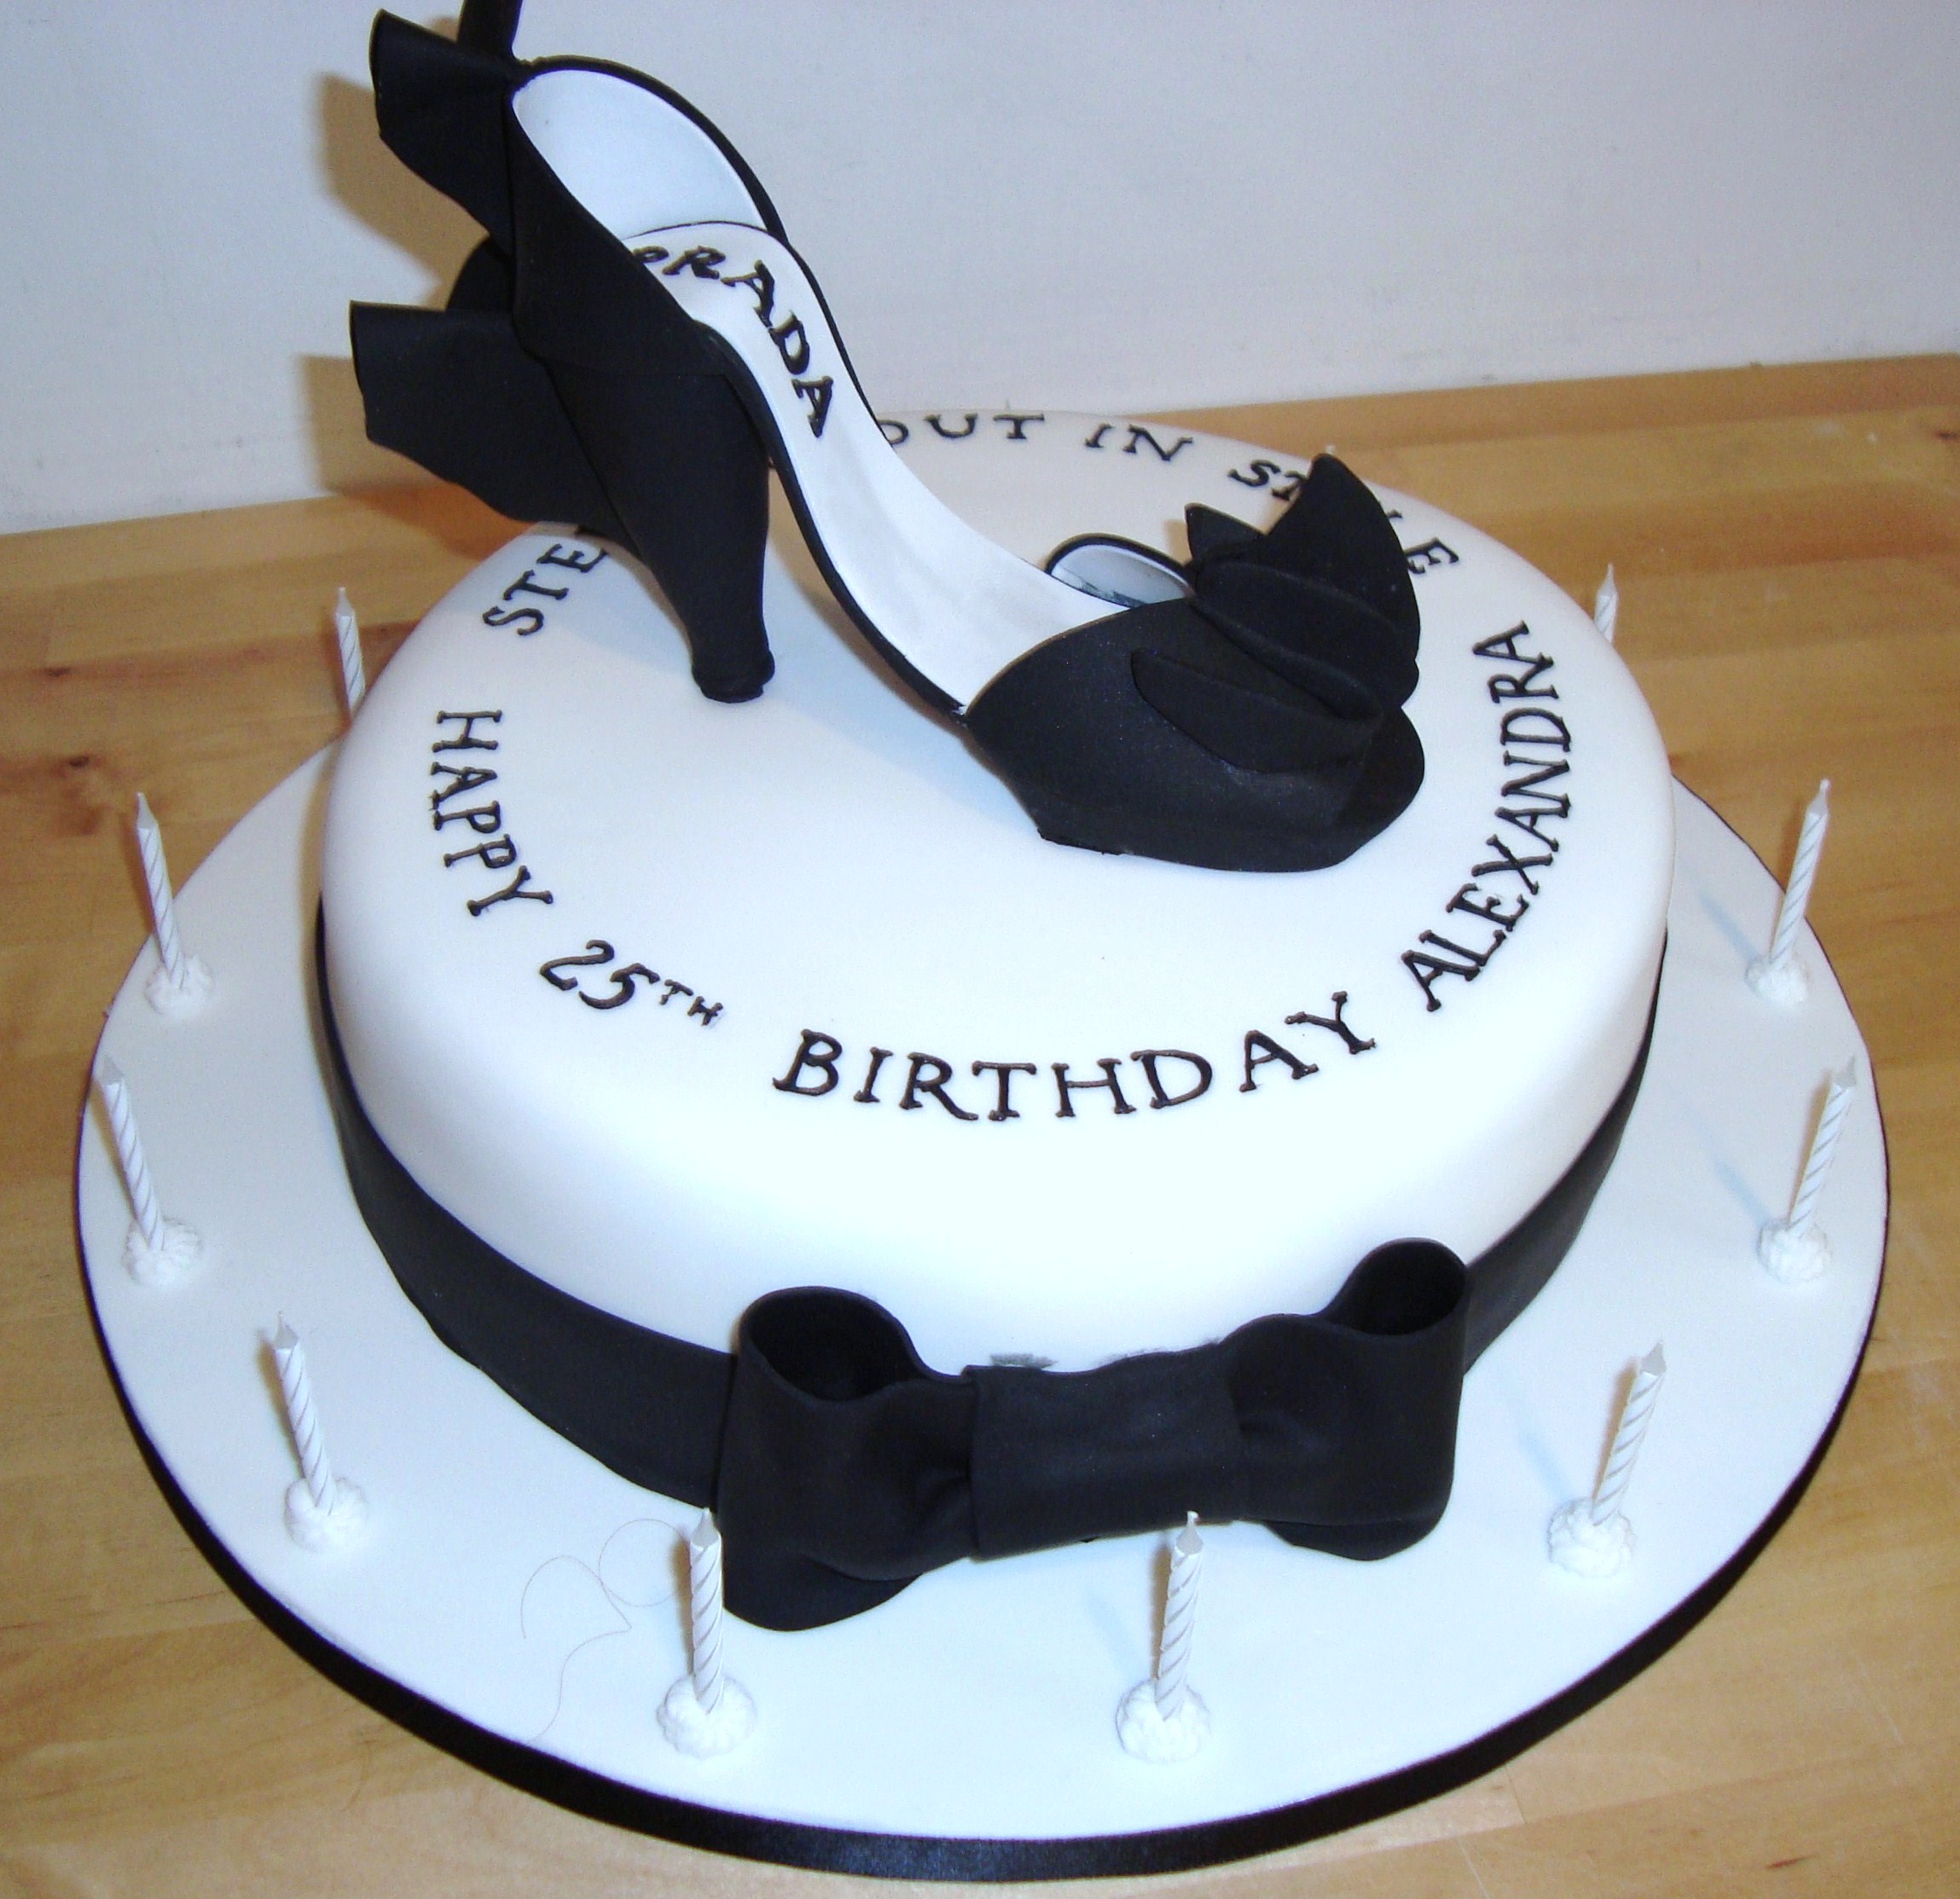 Birthday Cake Designs For Adults - Pin on Cake idea / It's important to ...